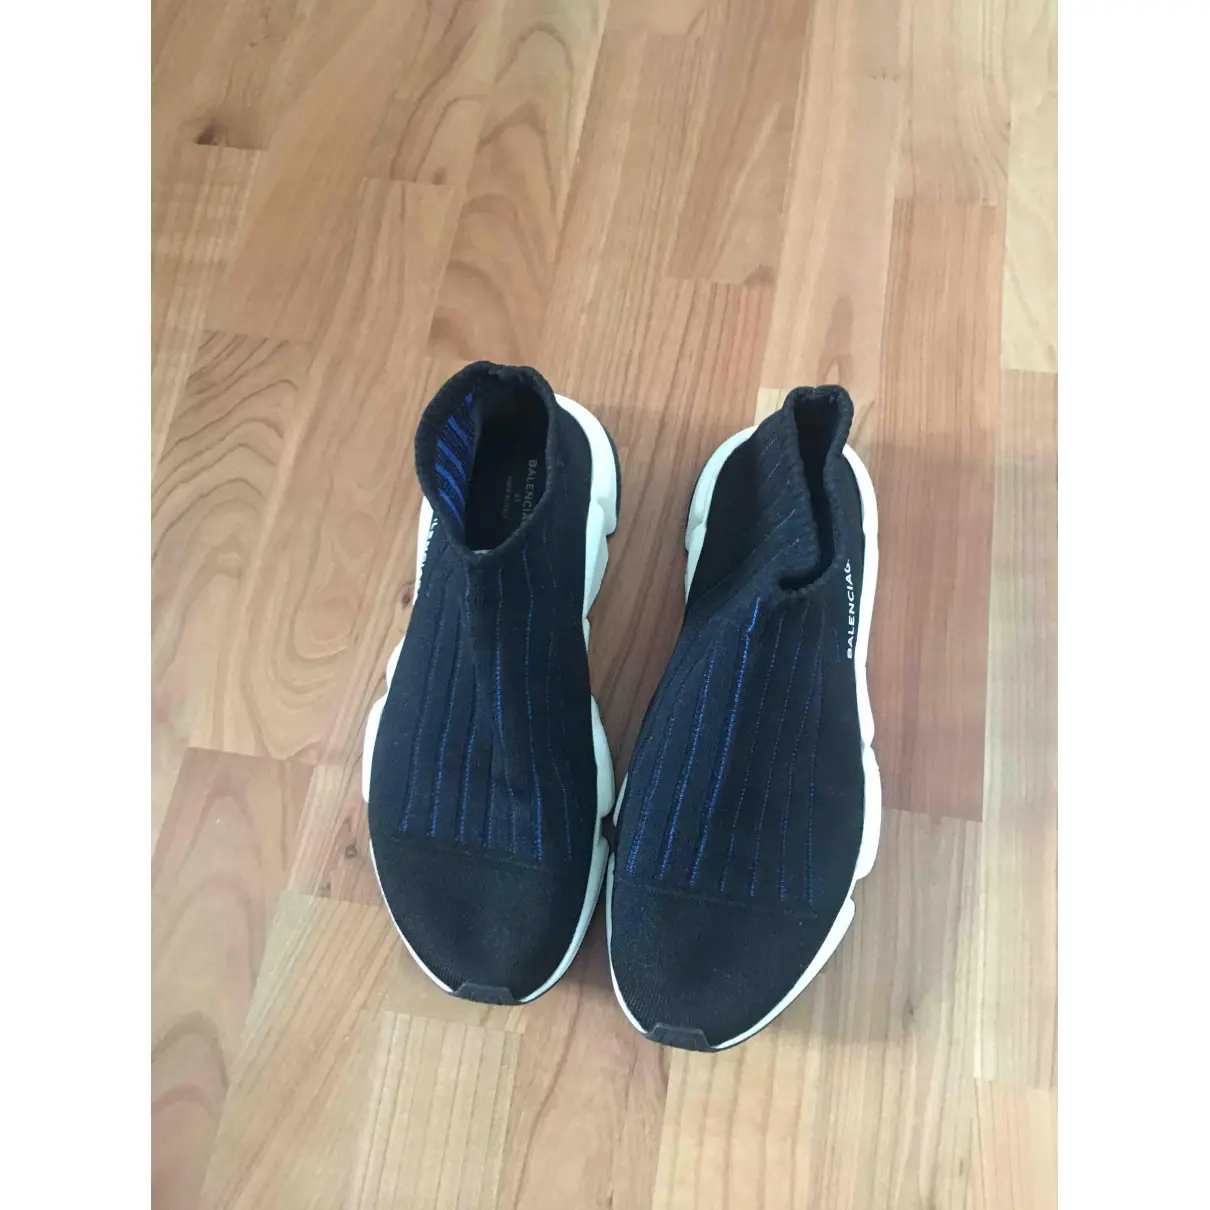 Buy Balenciaga Speed cloth low trainers online